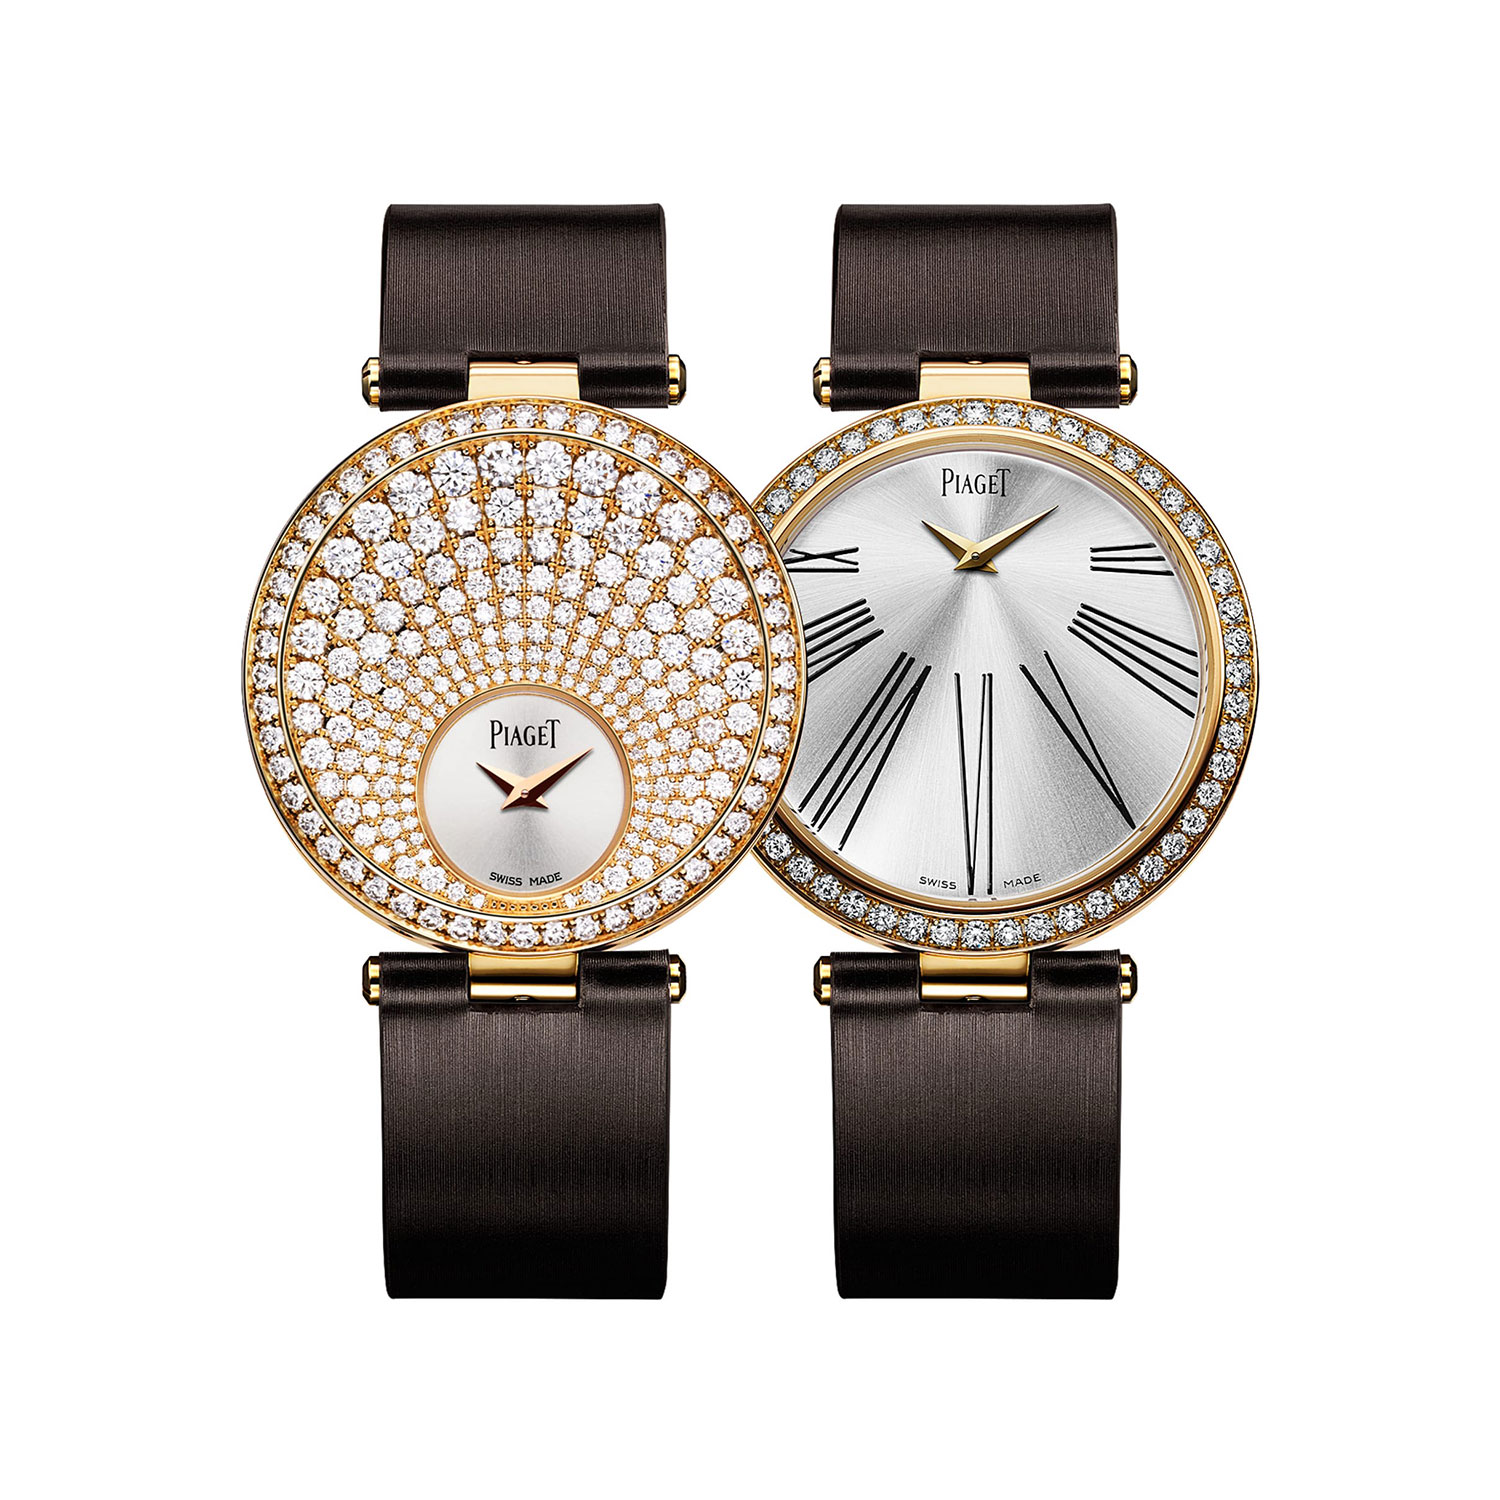 Montre limelight twice - Piaget